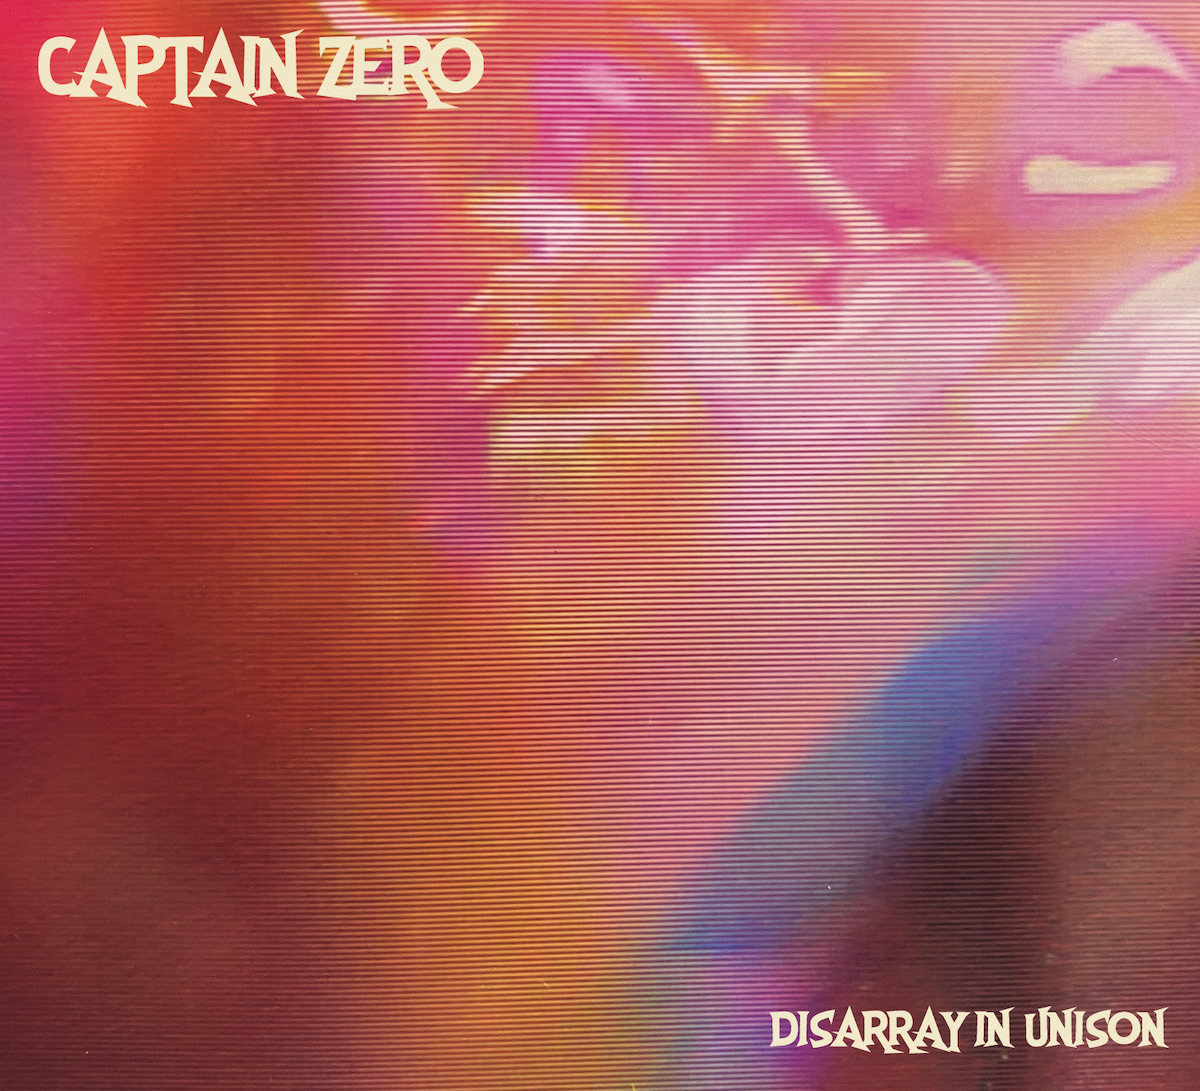 DEBUT EP REVIEW: Disarray in Unison by Captain Zero